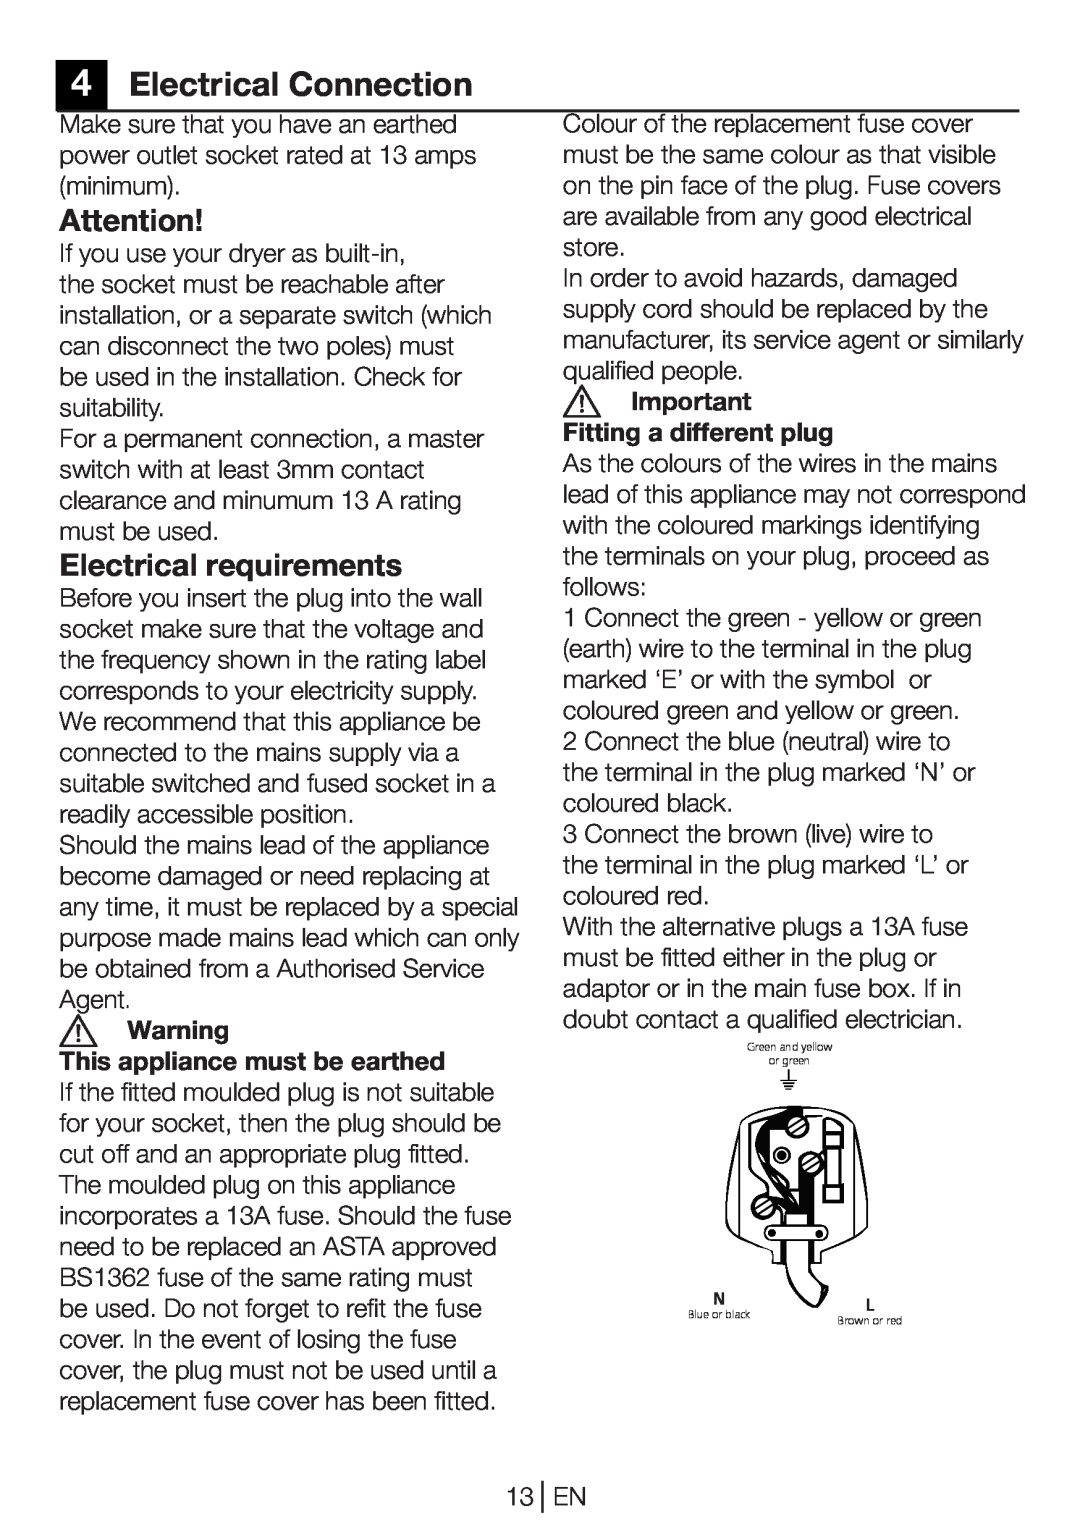 Beko DP 8045 CW manual Electrical Connection, Electrical requirements, A Warning This appliance must be earthed 